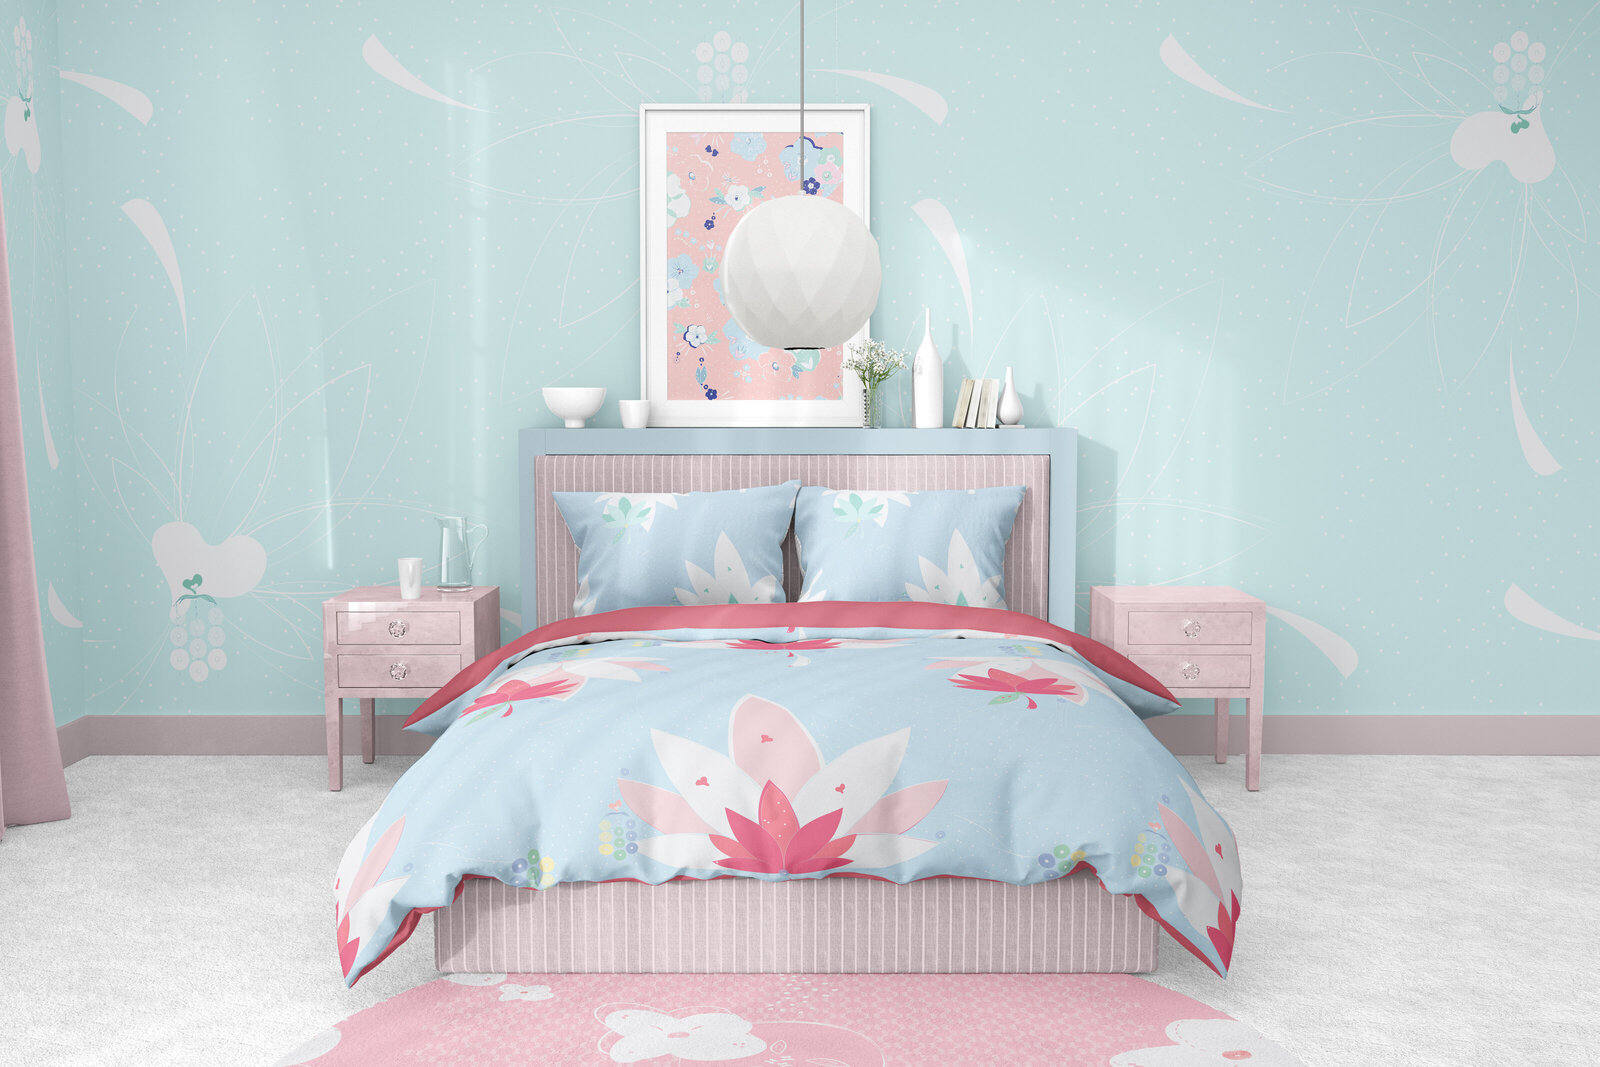 blue, pink, and white patterned bedspread in wallpapered bedroom